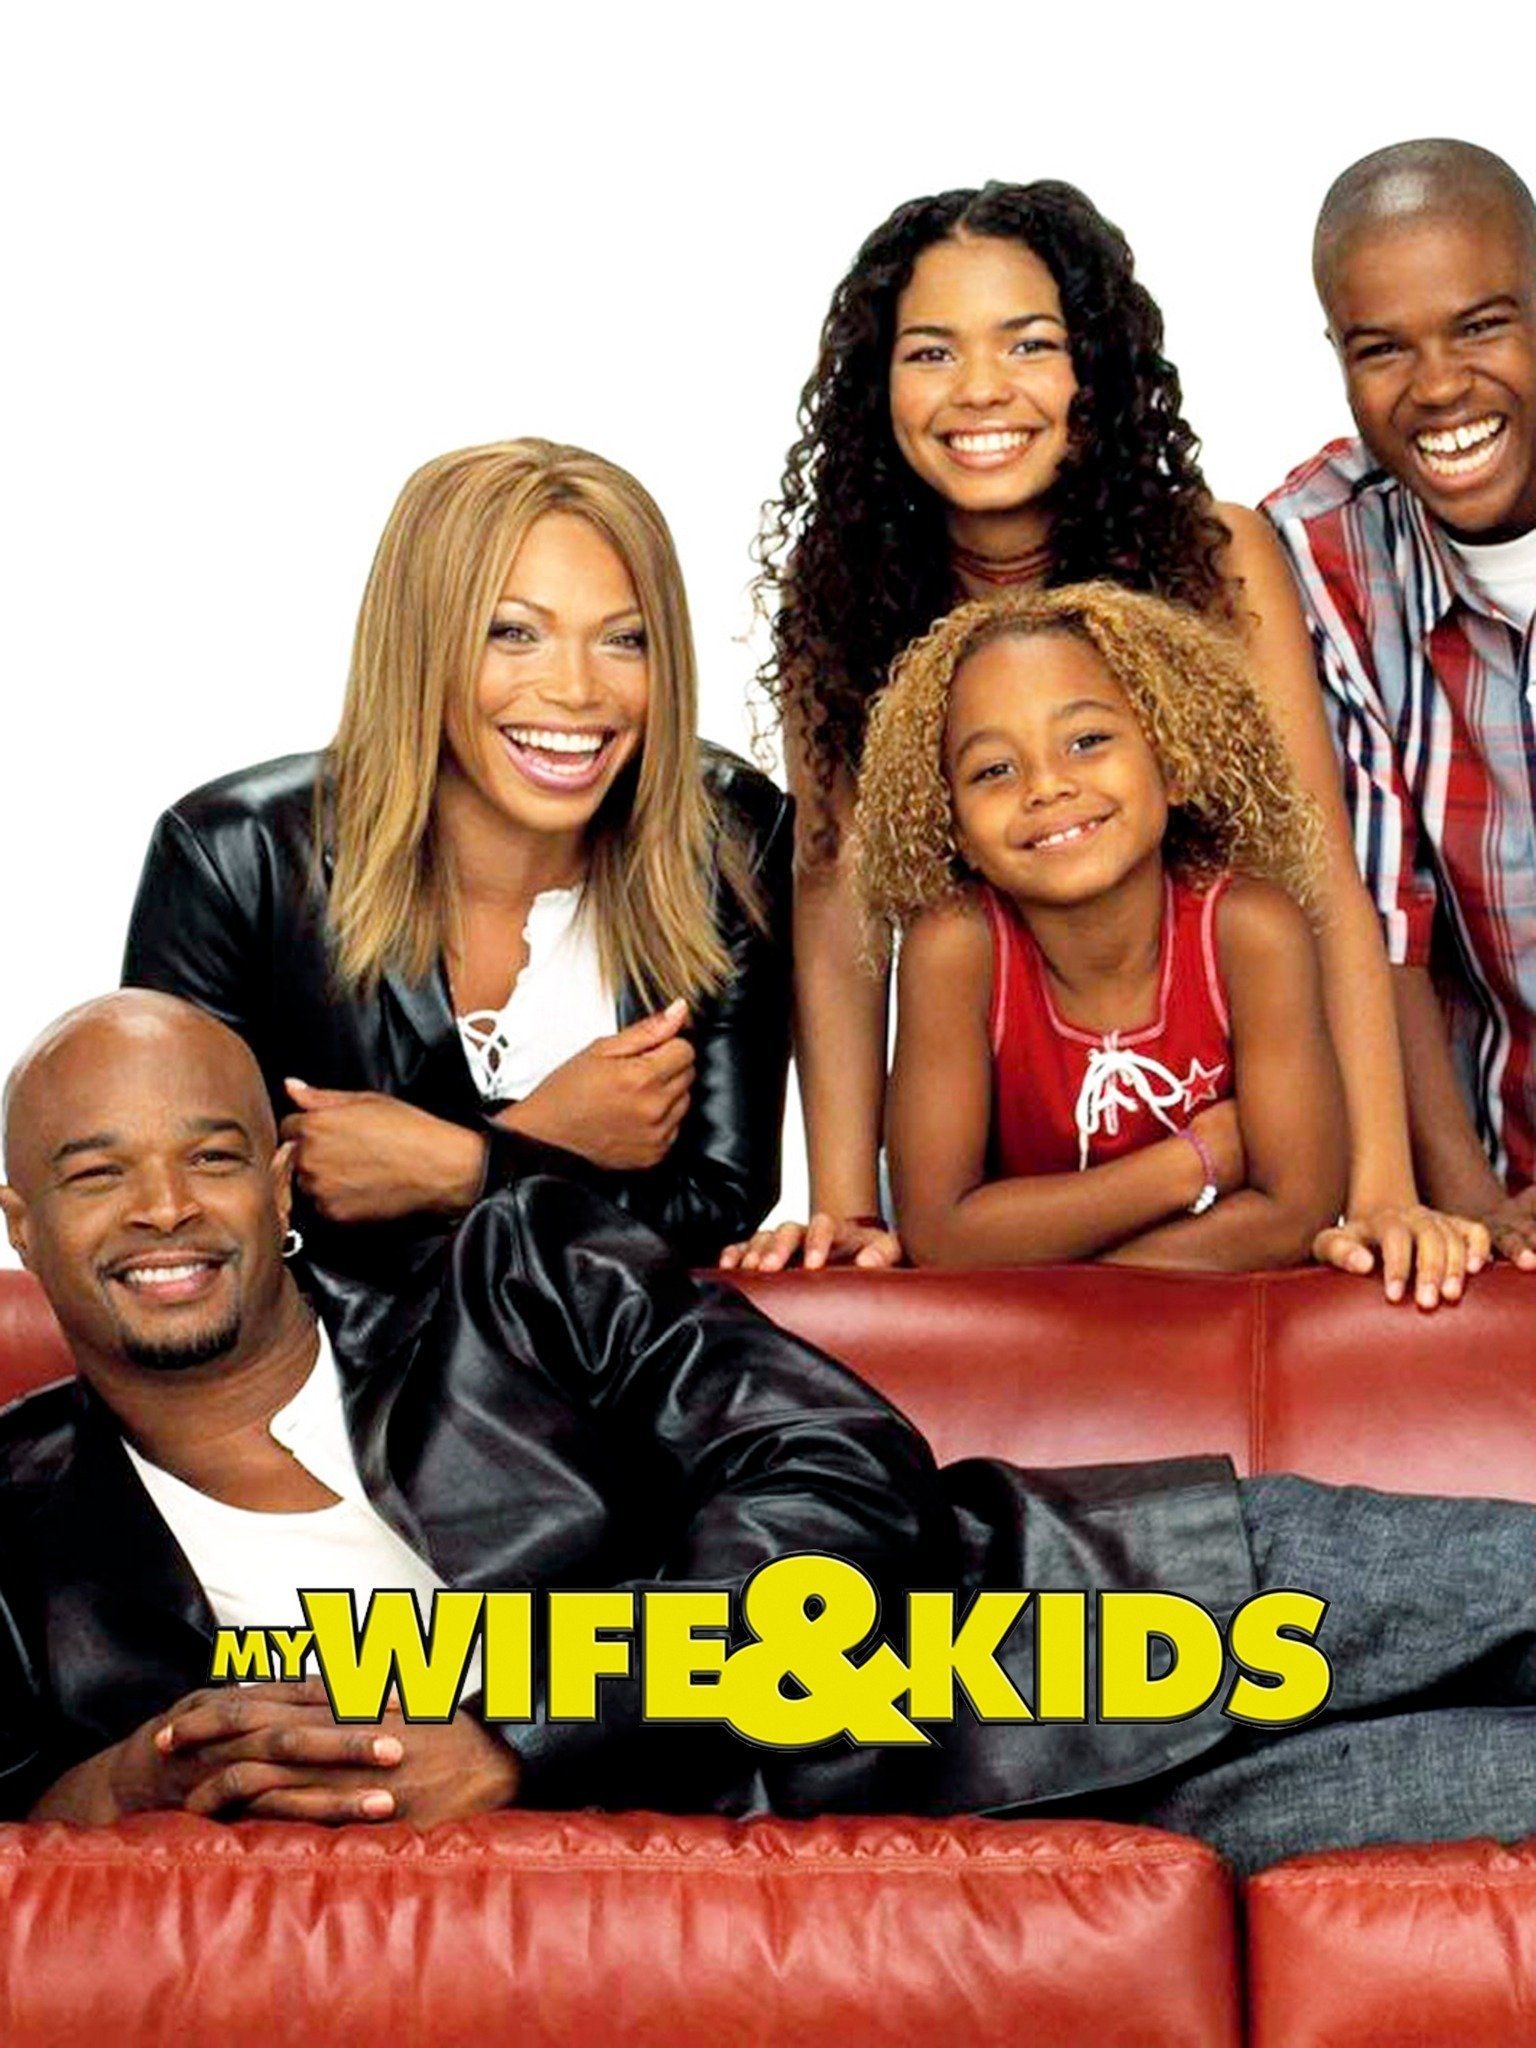 My Wife And Kids Wallpapers